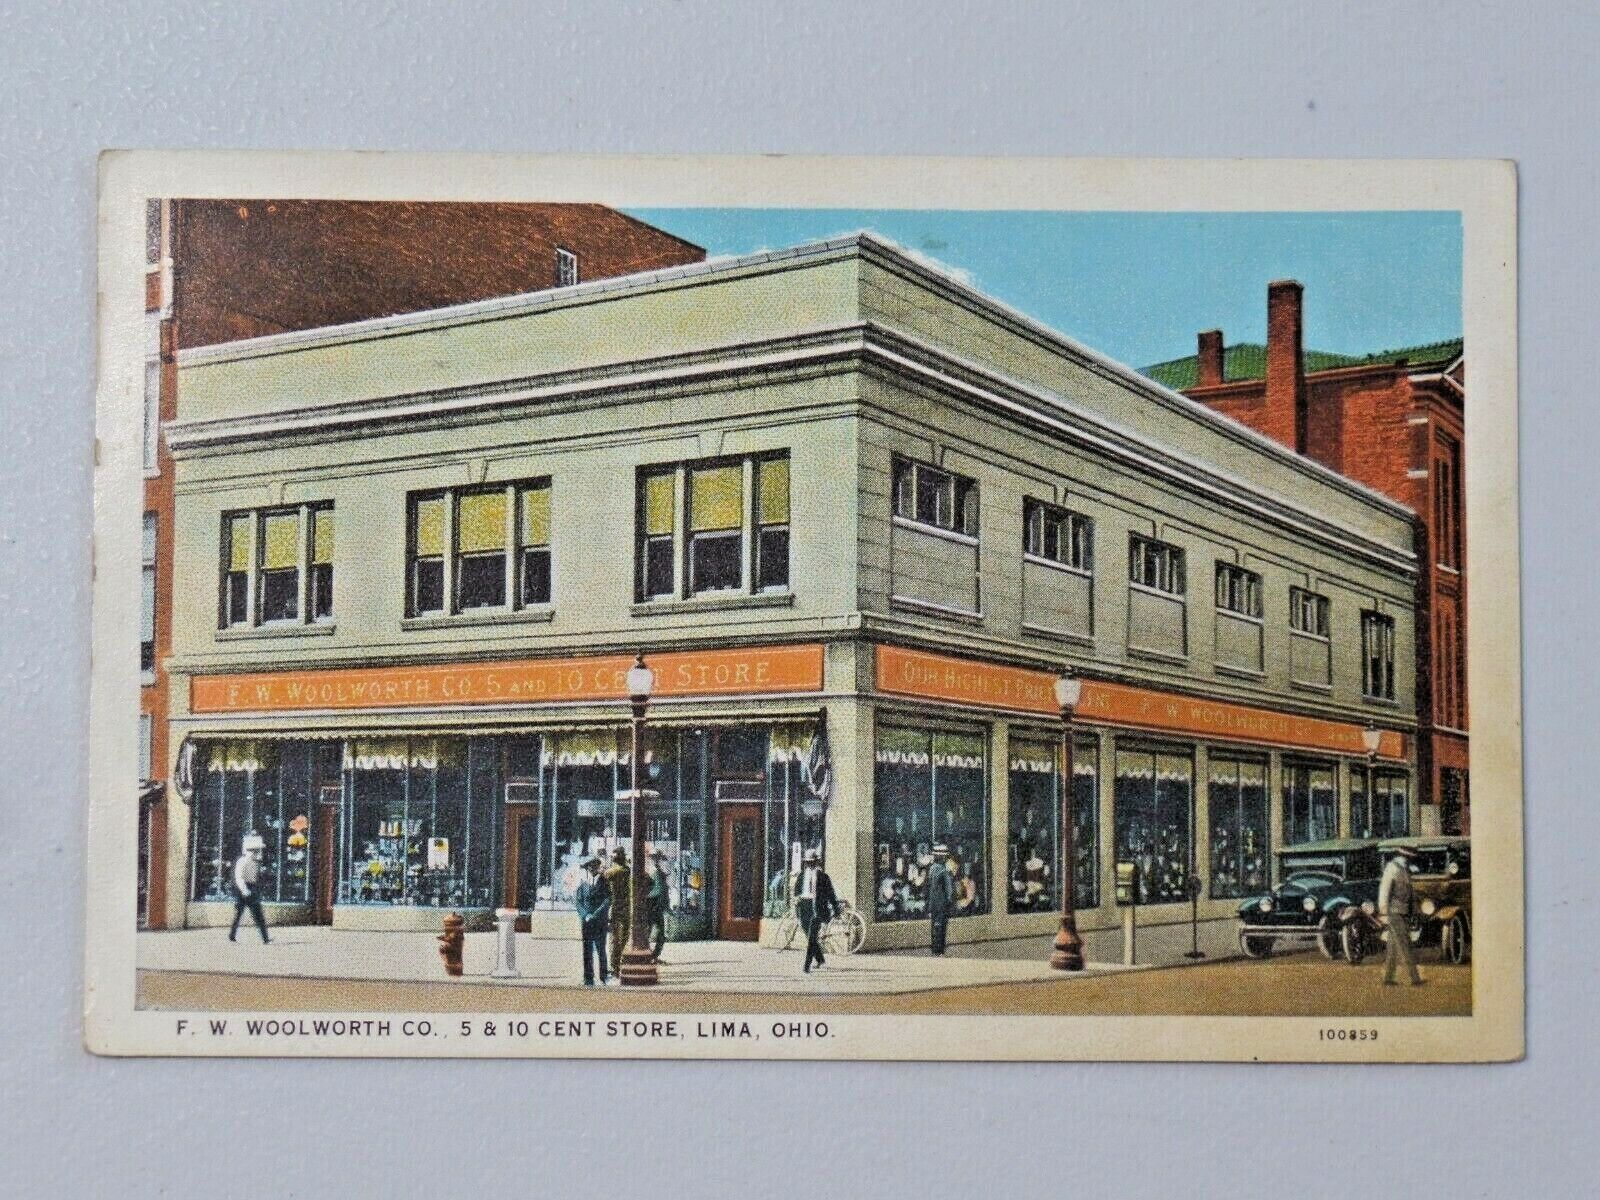 Vtg. F.W. Woolworth Co. 5 & 10 Cent Store, Lima, Ohio 1945 Postcard 6920